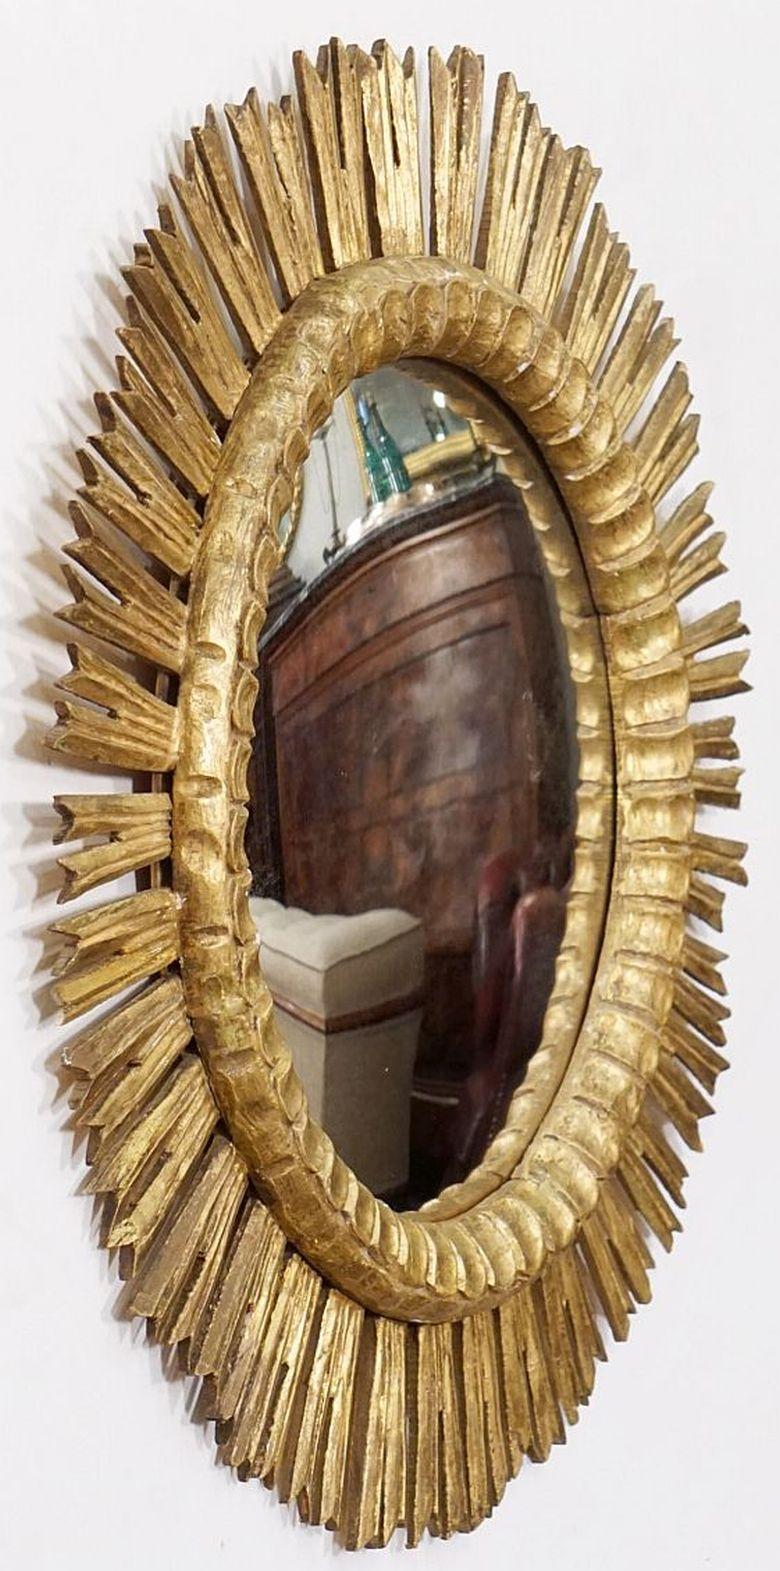 A lovely large scale French gilt sunburst or starburst convex mirror, 25 inches diameter, with round mirrored convex glass center in a moulded frame surrounded by emanating gilded rays.

